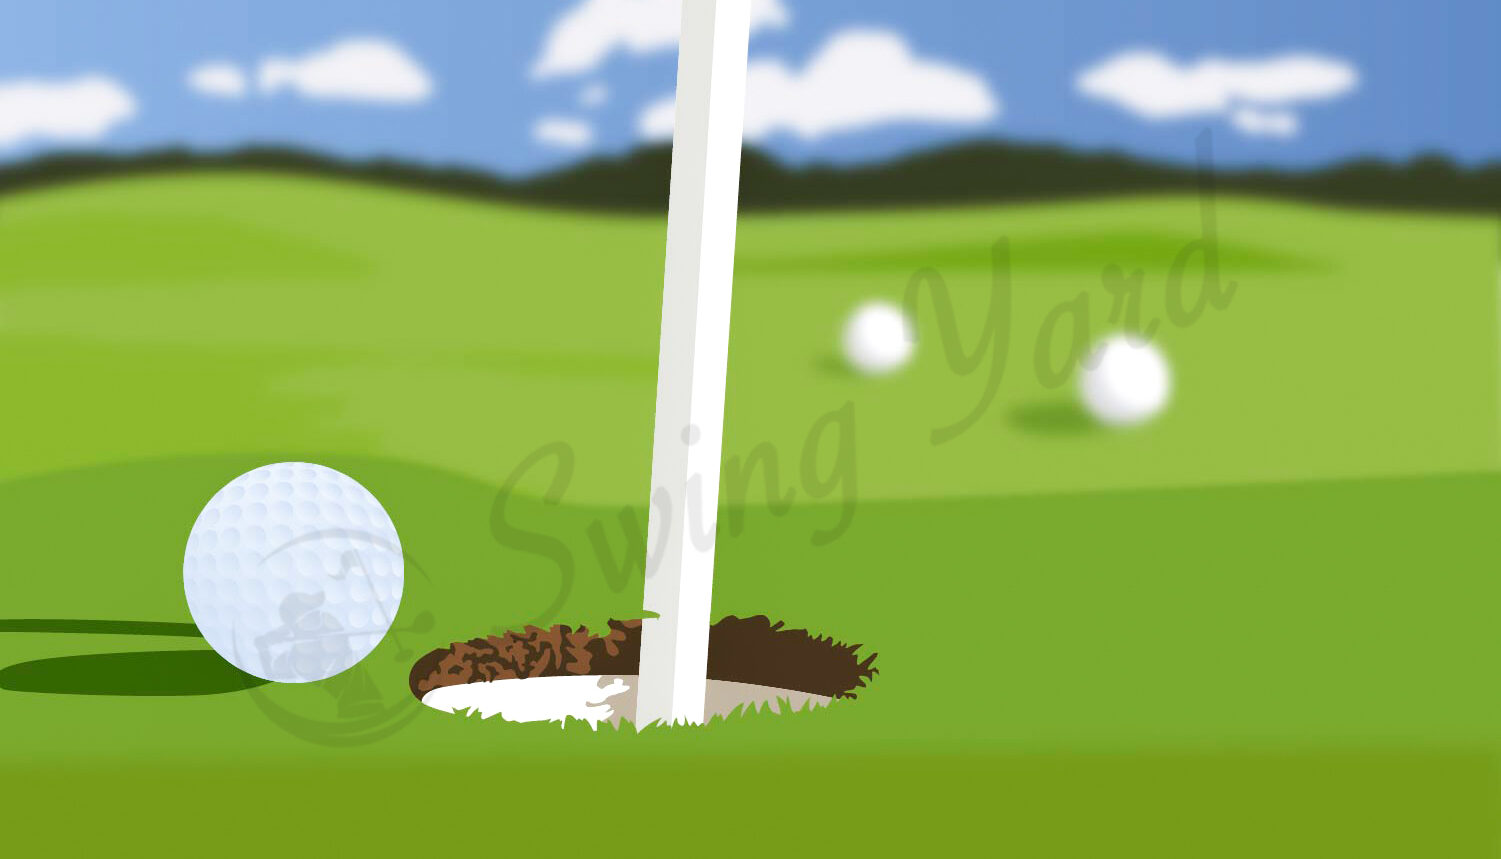 A golf ball about to go in the hole